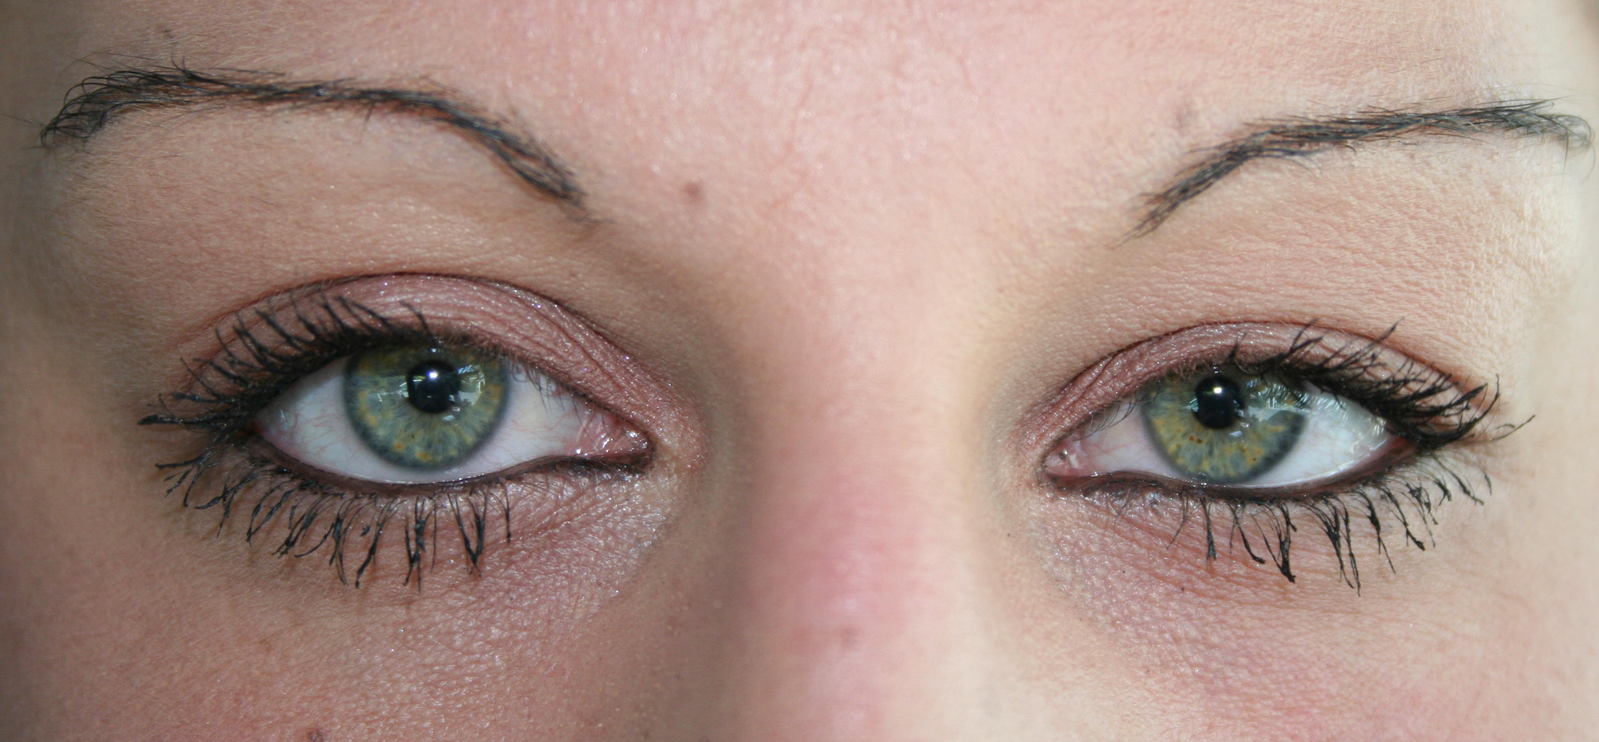 woman with very large lashes has green eyes